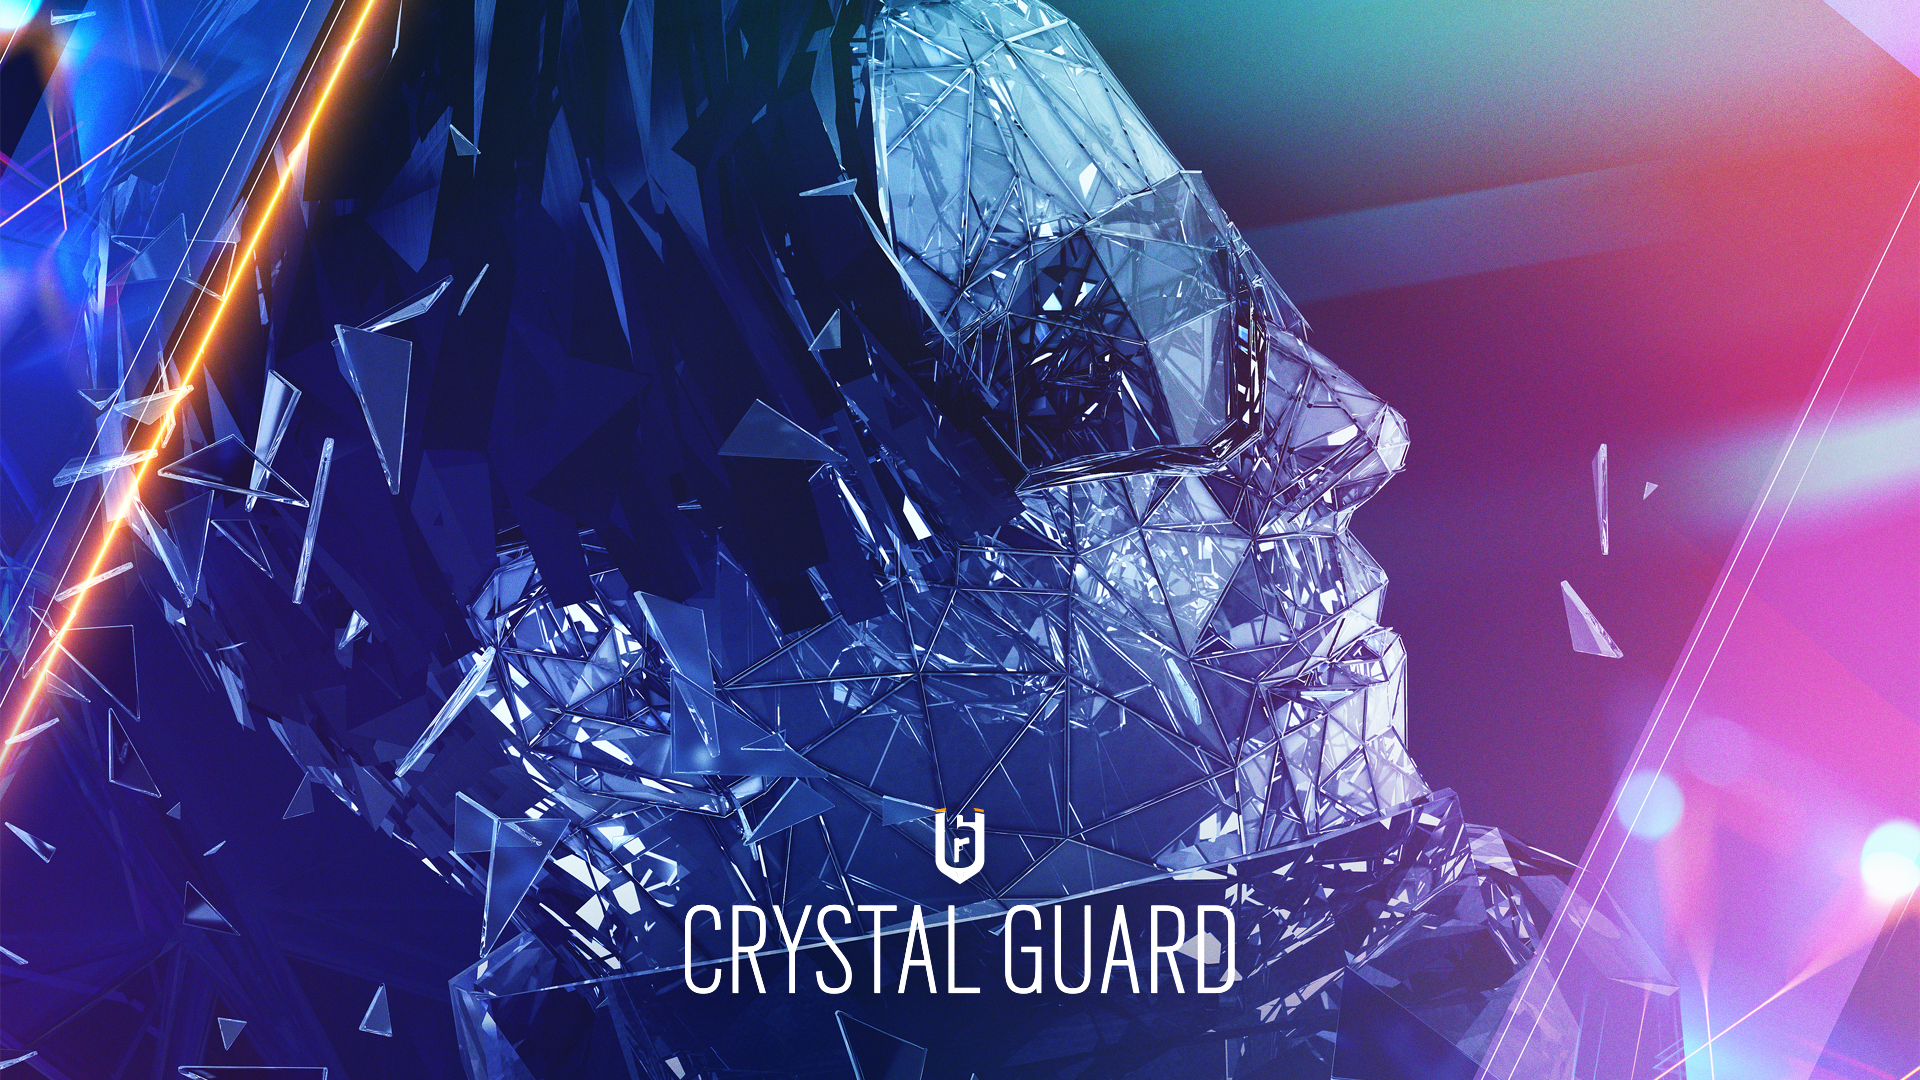 Image for Rainbow Six Siege Operation Crystal Guard revealed - new operator, map changes, and more